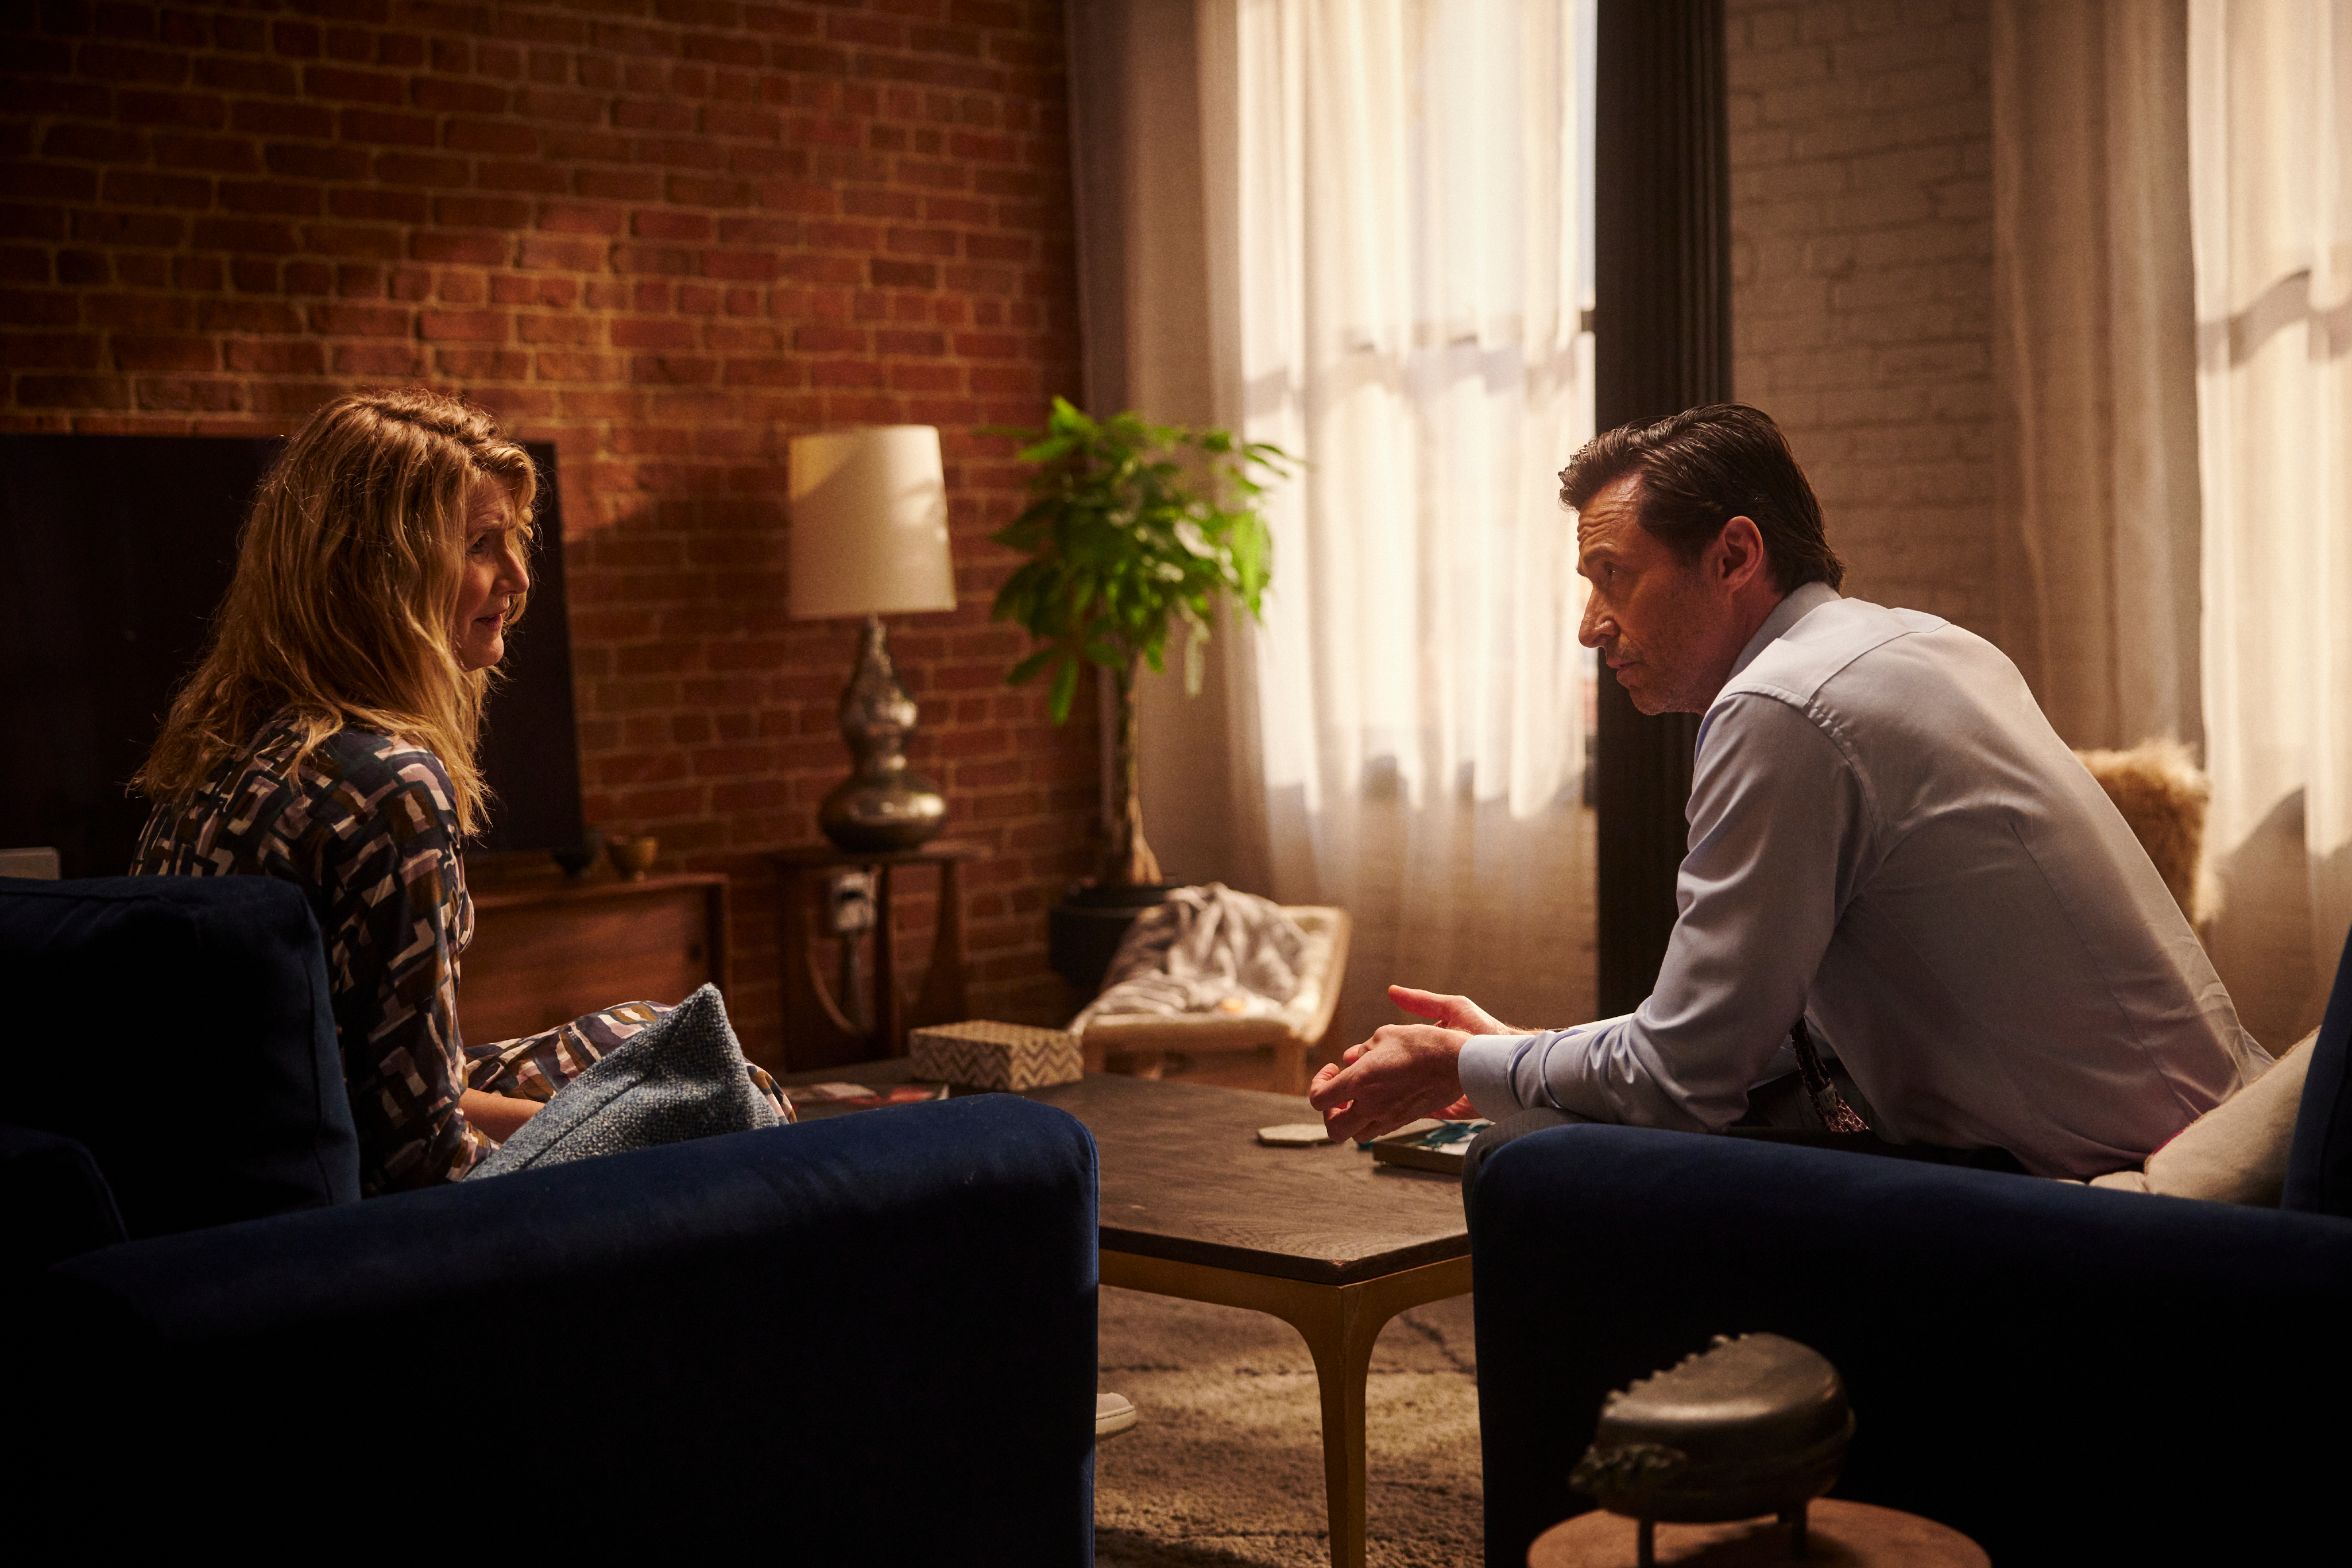 Laura Dern and Hugh Jackman sit near a coffee table together in The Son.